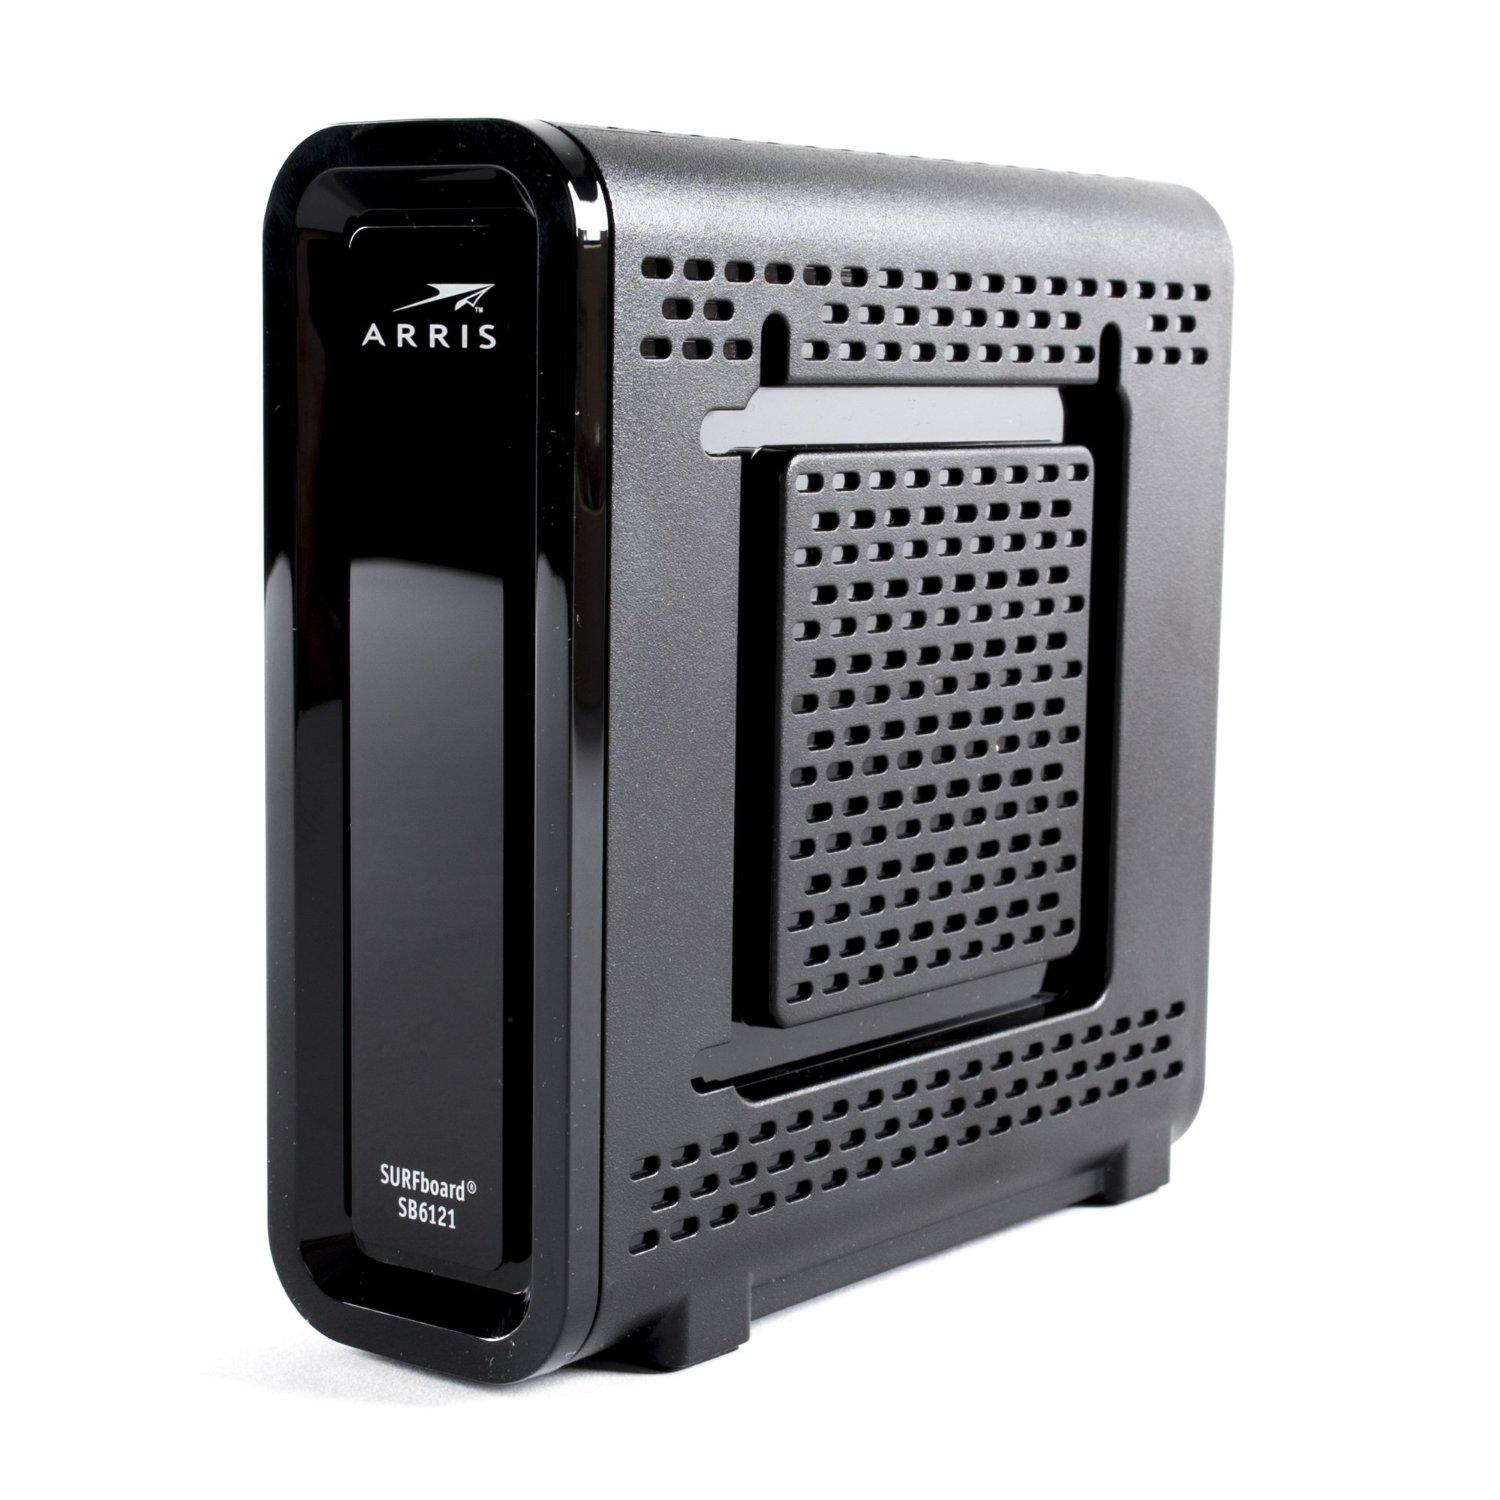 SURFboard DOCSIS 3.0 Cable Modem Only $29.99! Today Only!